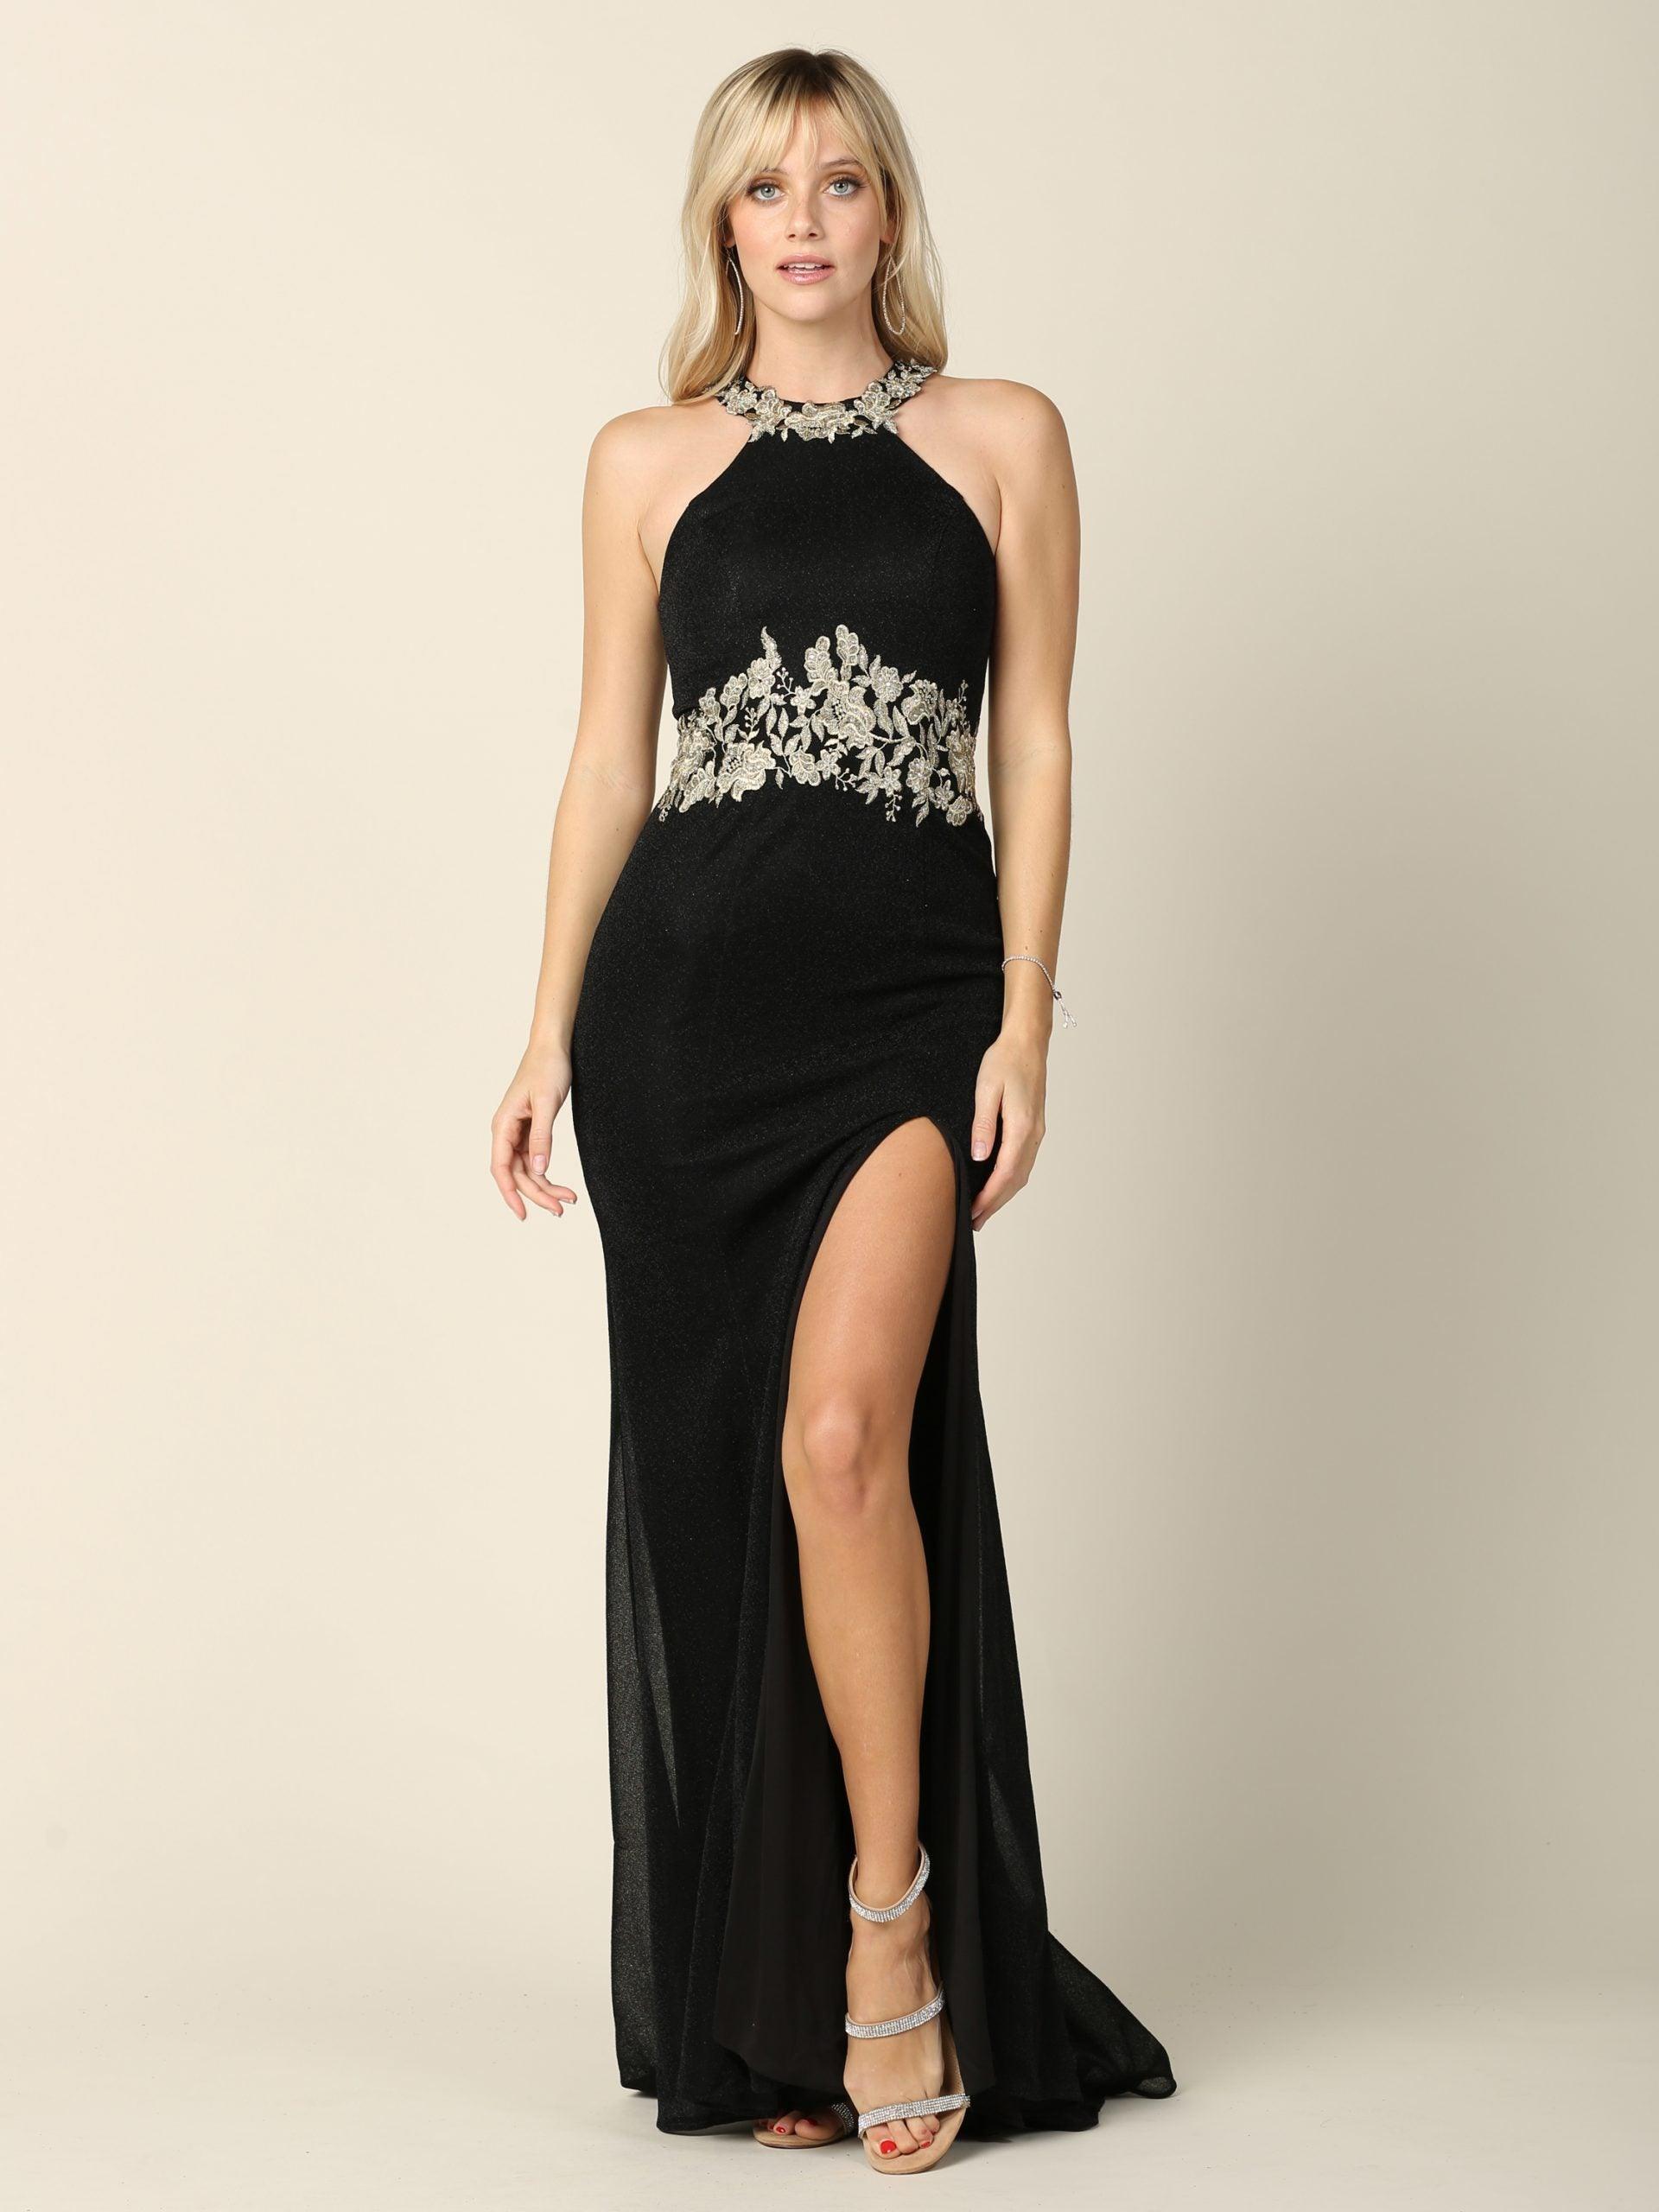 Long Formal Fitted Halter Metallic Prom Dress for $39.99 – The Dress Outlet